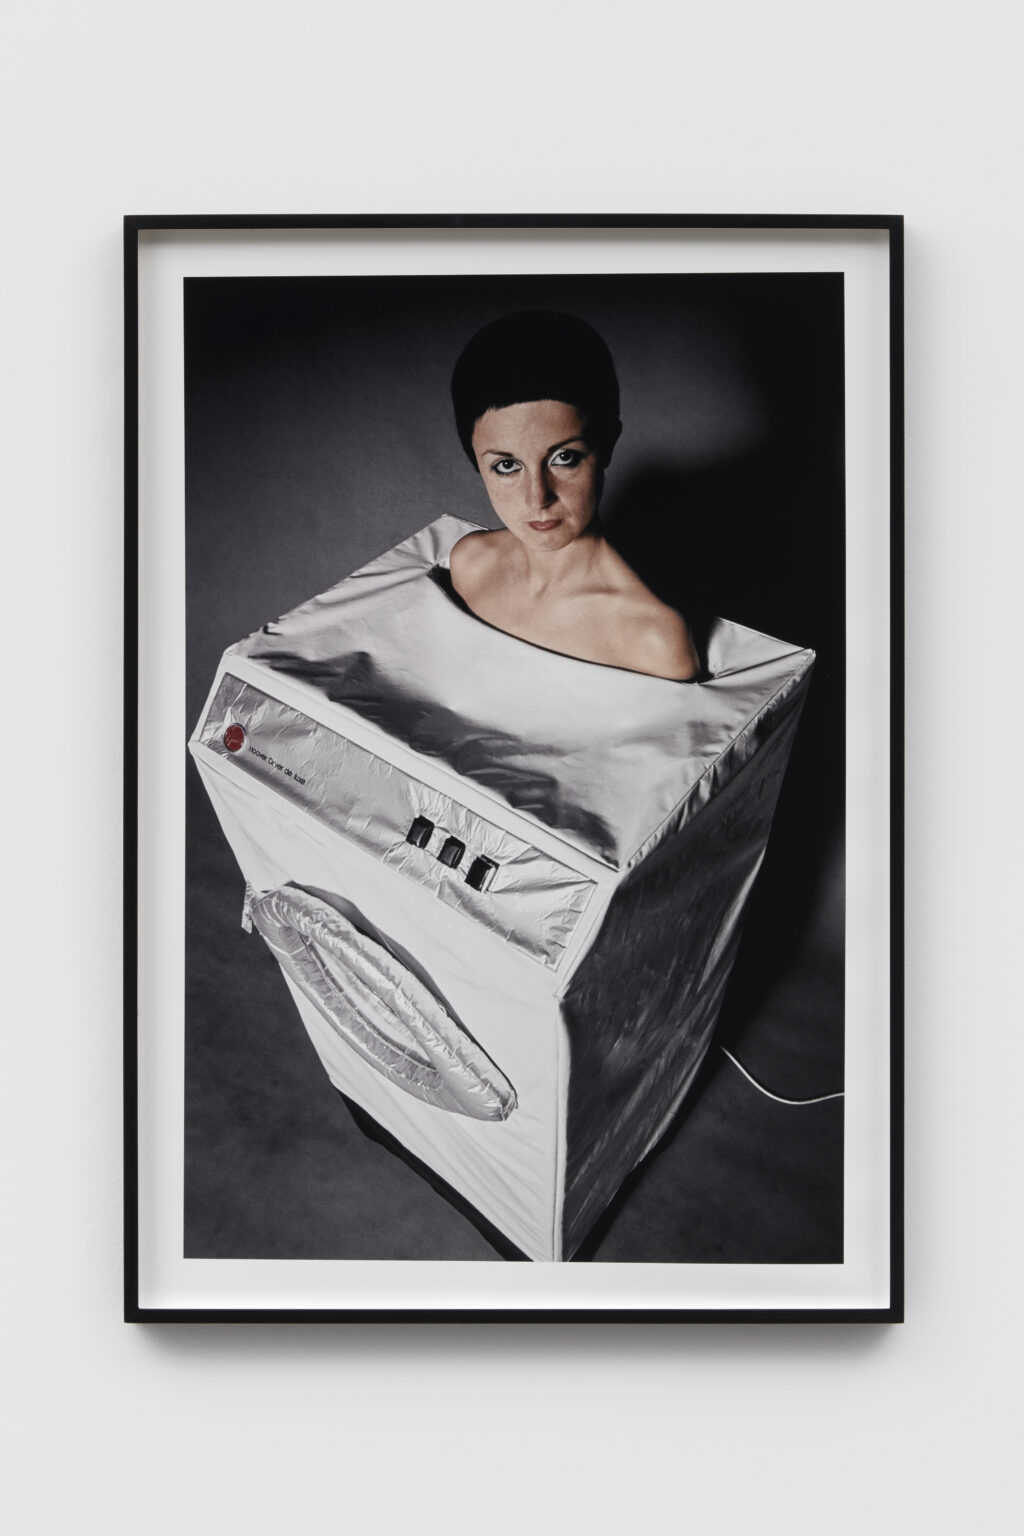 <h3 class="LC20lb MBeuO DKV0Md">SOCIÉTÉ </h3>
<p> </p>
<p>Helen Chadwick, In the Kitchen (Washing Machine), 1977, All images are credited and Courtesy of Richard Saltoun Gallery London, Rome and New York and Société, Berlin<b>.</b></p>
